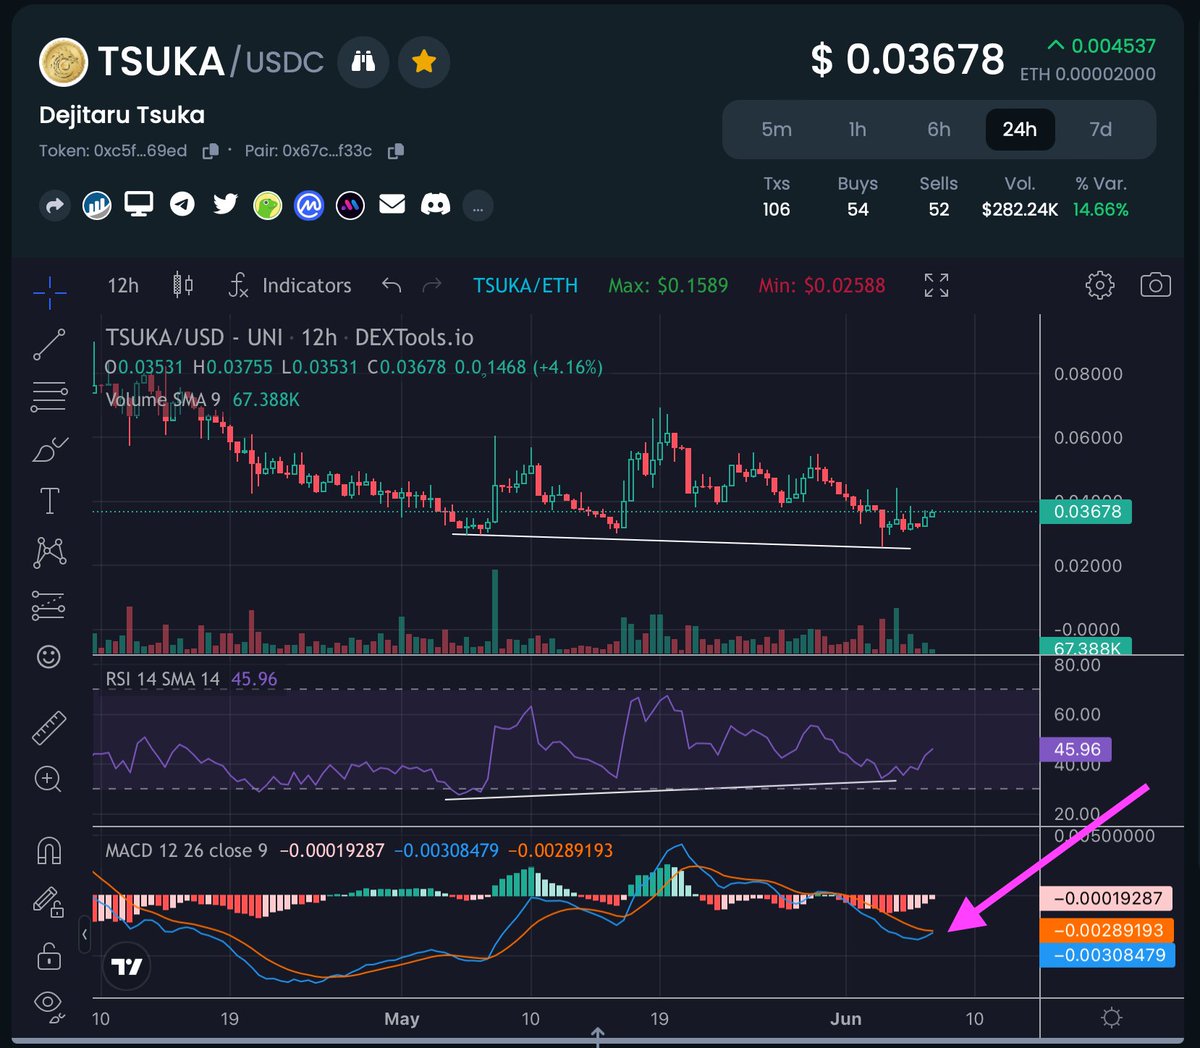 $TSUKA is amazingly resilient!  Despite recent news looking to form bullish divergence and MACD cross on the 12hr.  My bag is packed.  Full send the dragon!